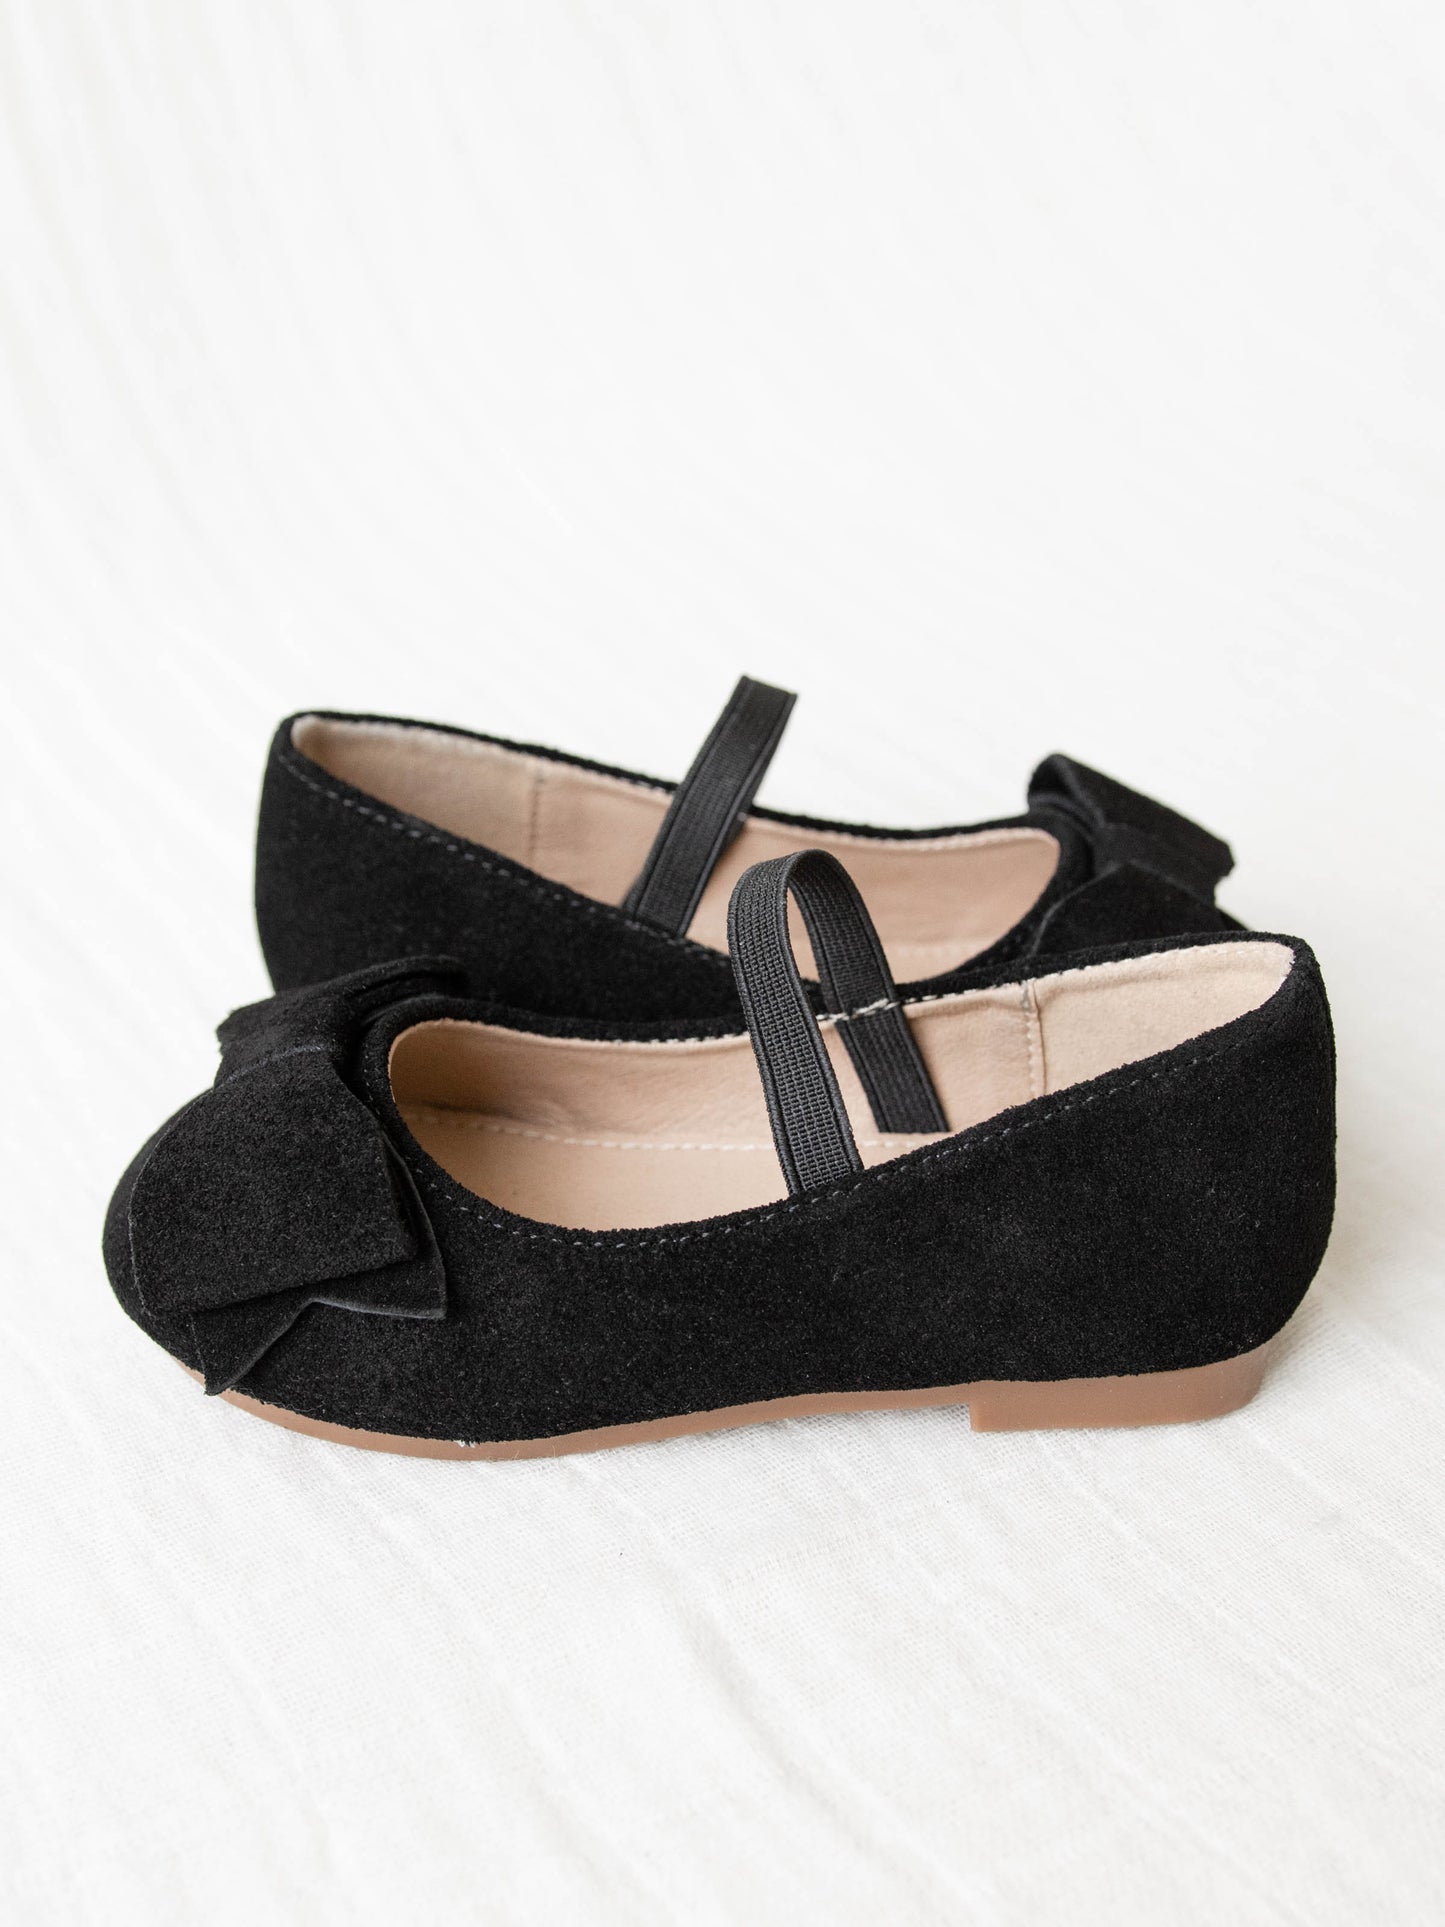 These Big Bow Suede Ballet shoe come in Black with an elastic strap across the top of the foot. The suede bows sit proudly on top of the shoes’ toe.